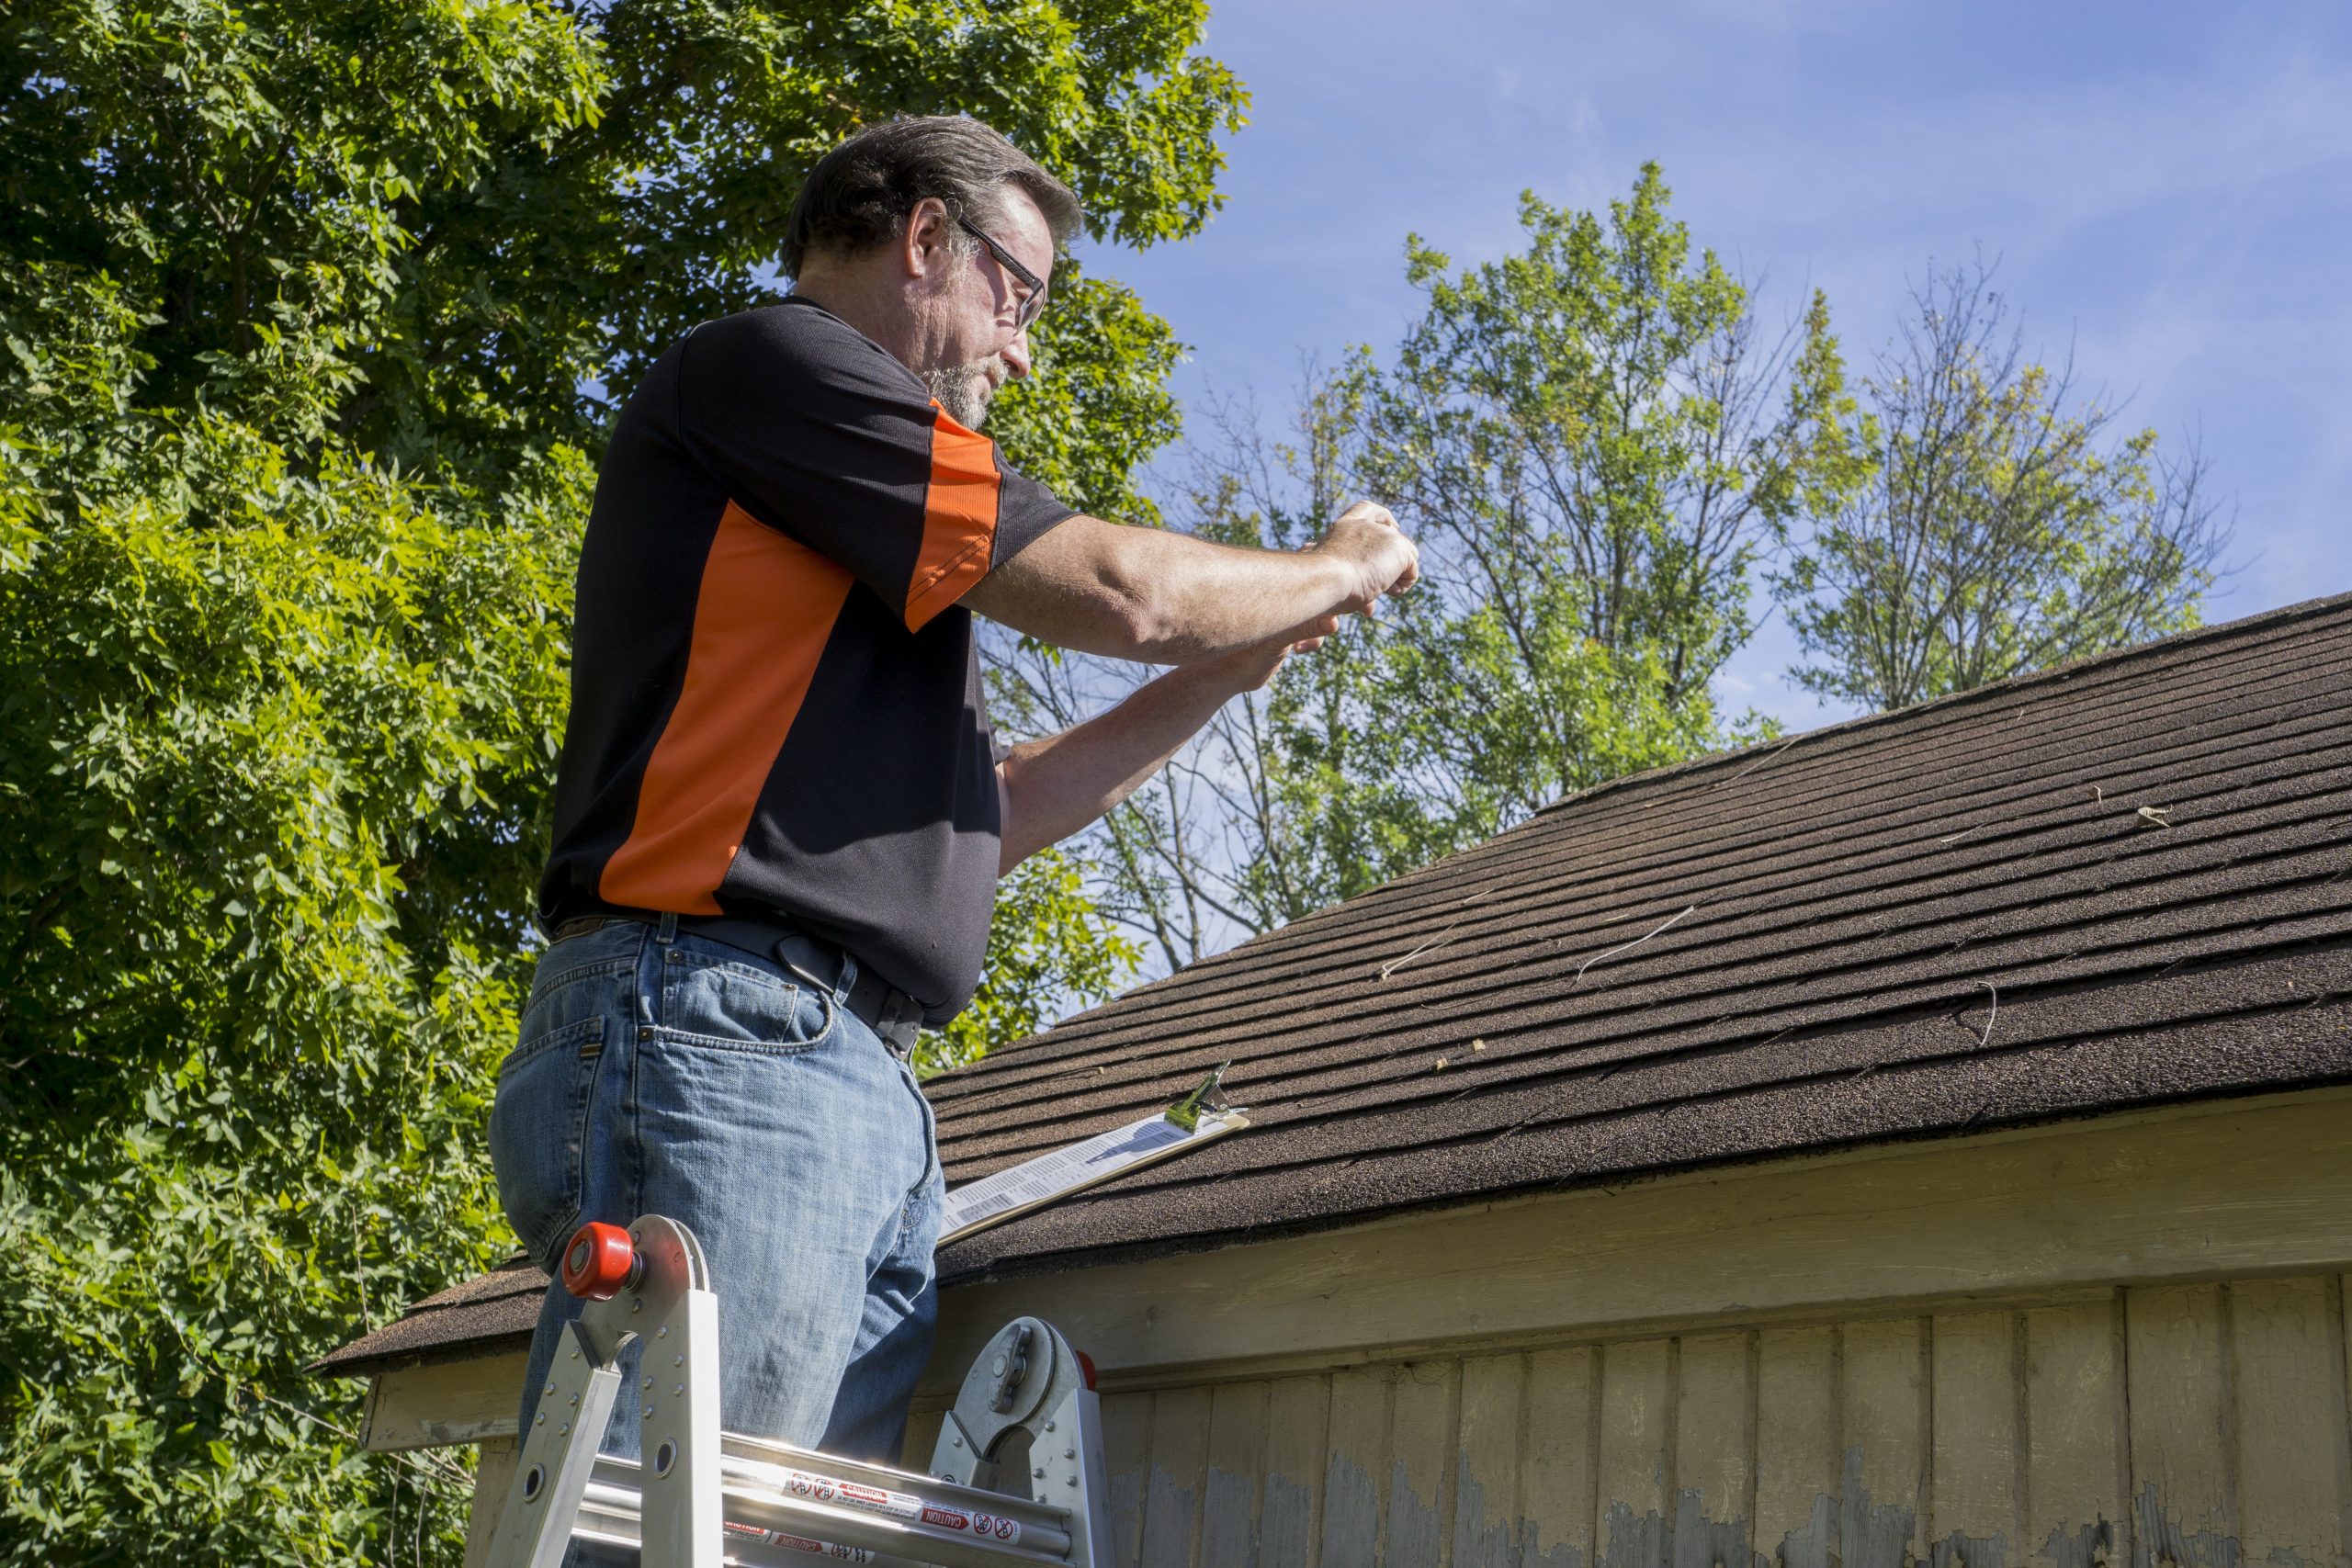 3 Steps to Filing an Insurance Claim When Your Roof is Damaged